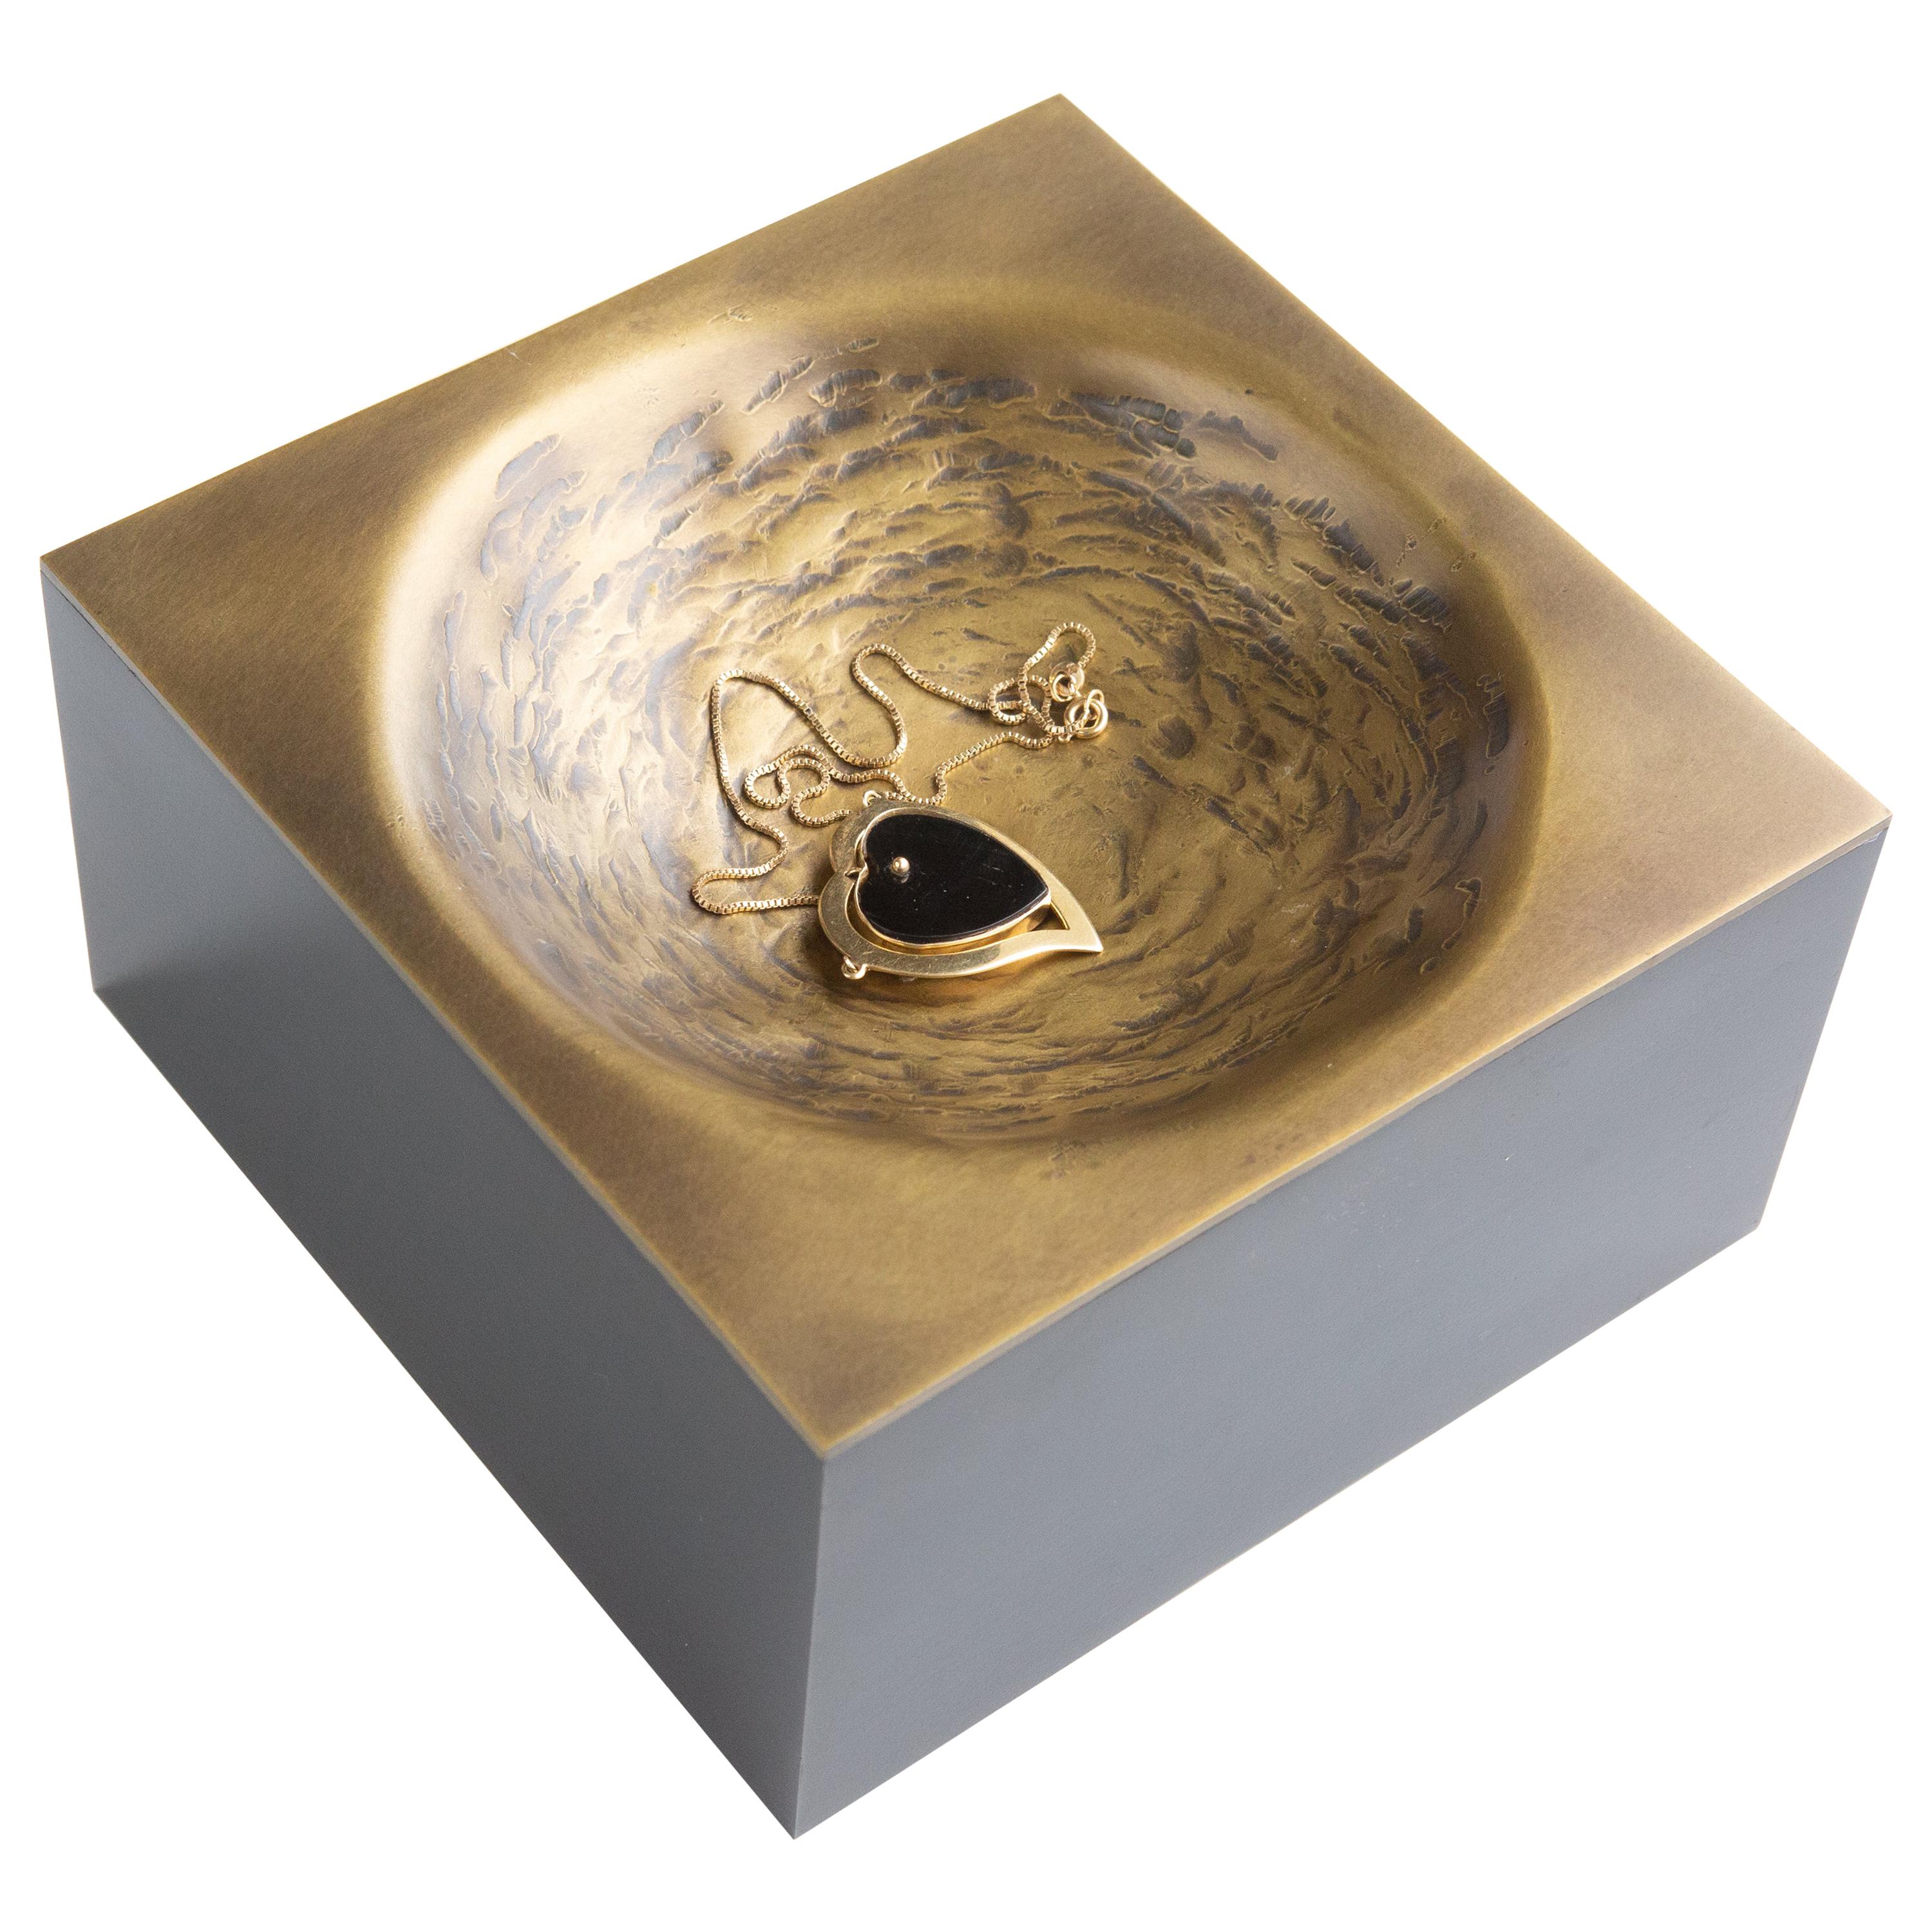 LIA 6" Square Handcrafted Brass and Steel Valet Bowl Tray by Soraya Osorio For Sale